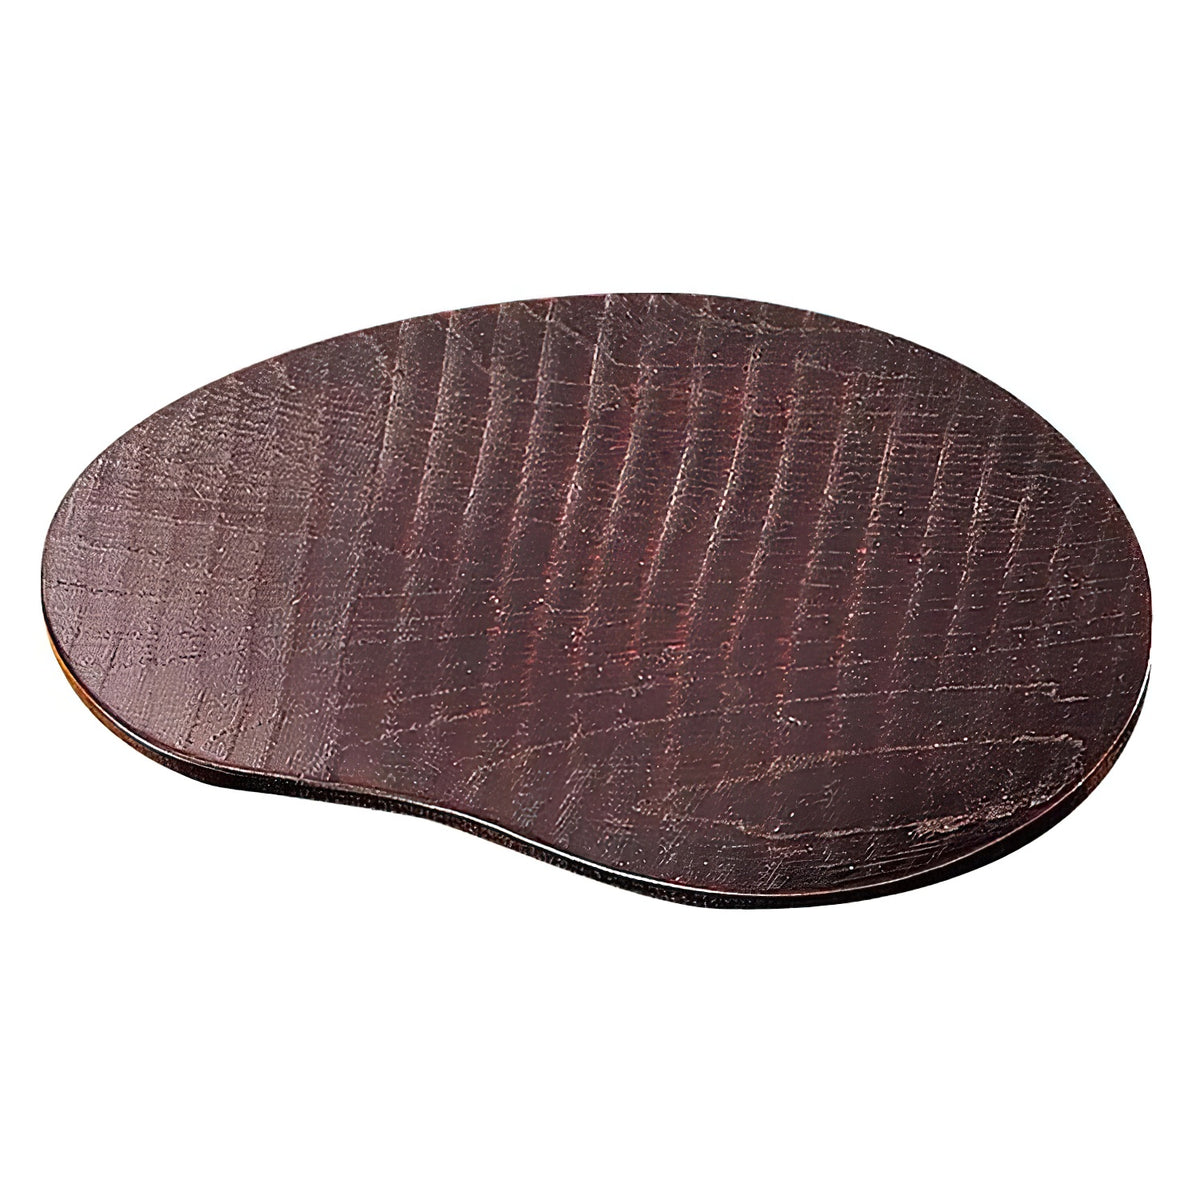 Yamacoh Wooden Bean-Shaped Sushi Serving Plate